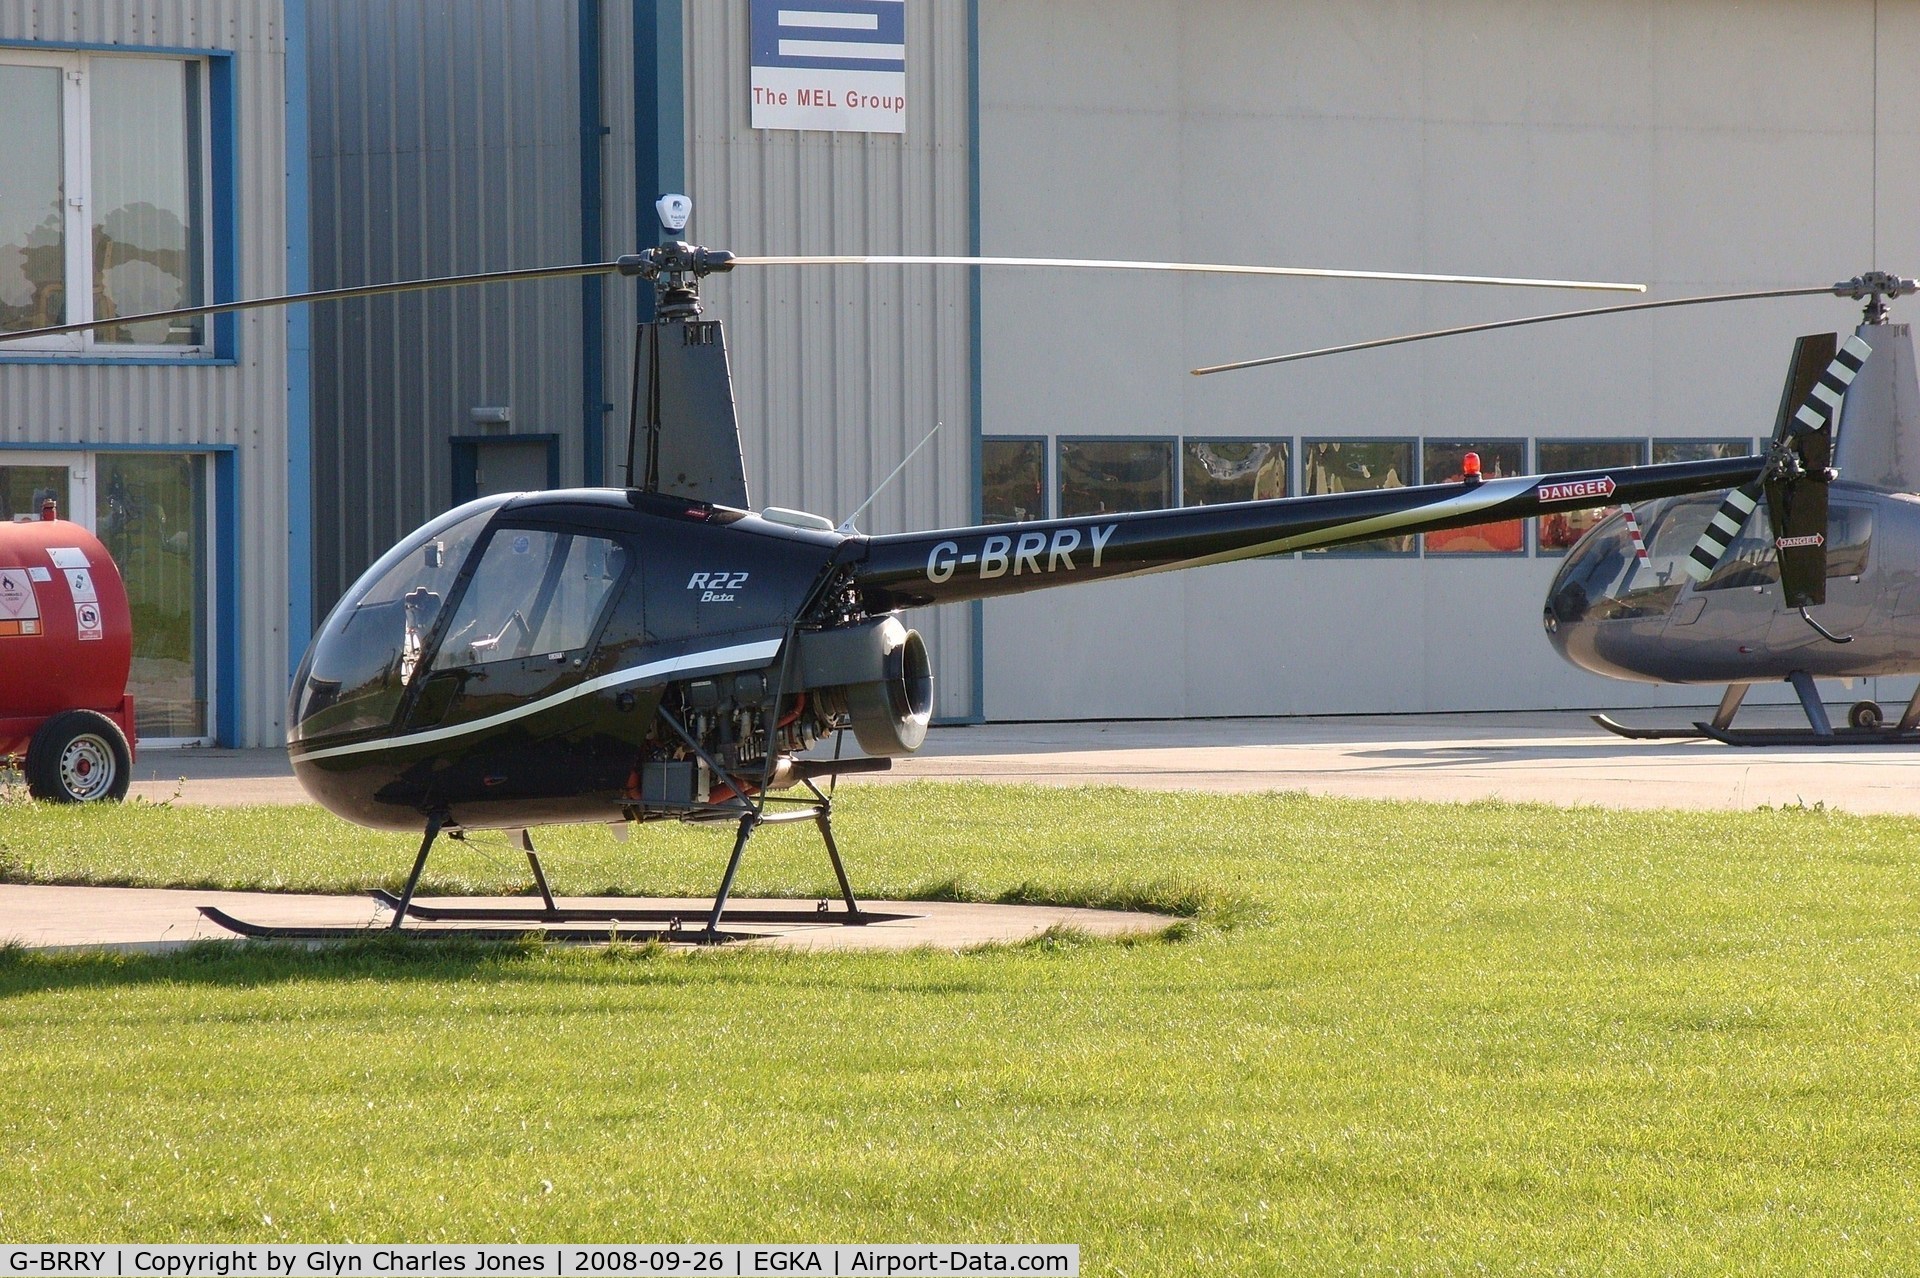 G-BRRY, 1989 Robinson R22 Beta C/N 1193, Owned by Fast Helicopters.